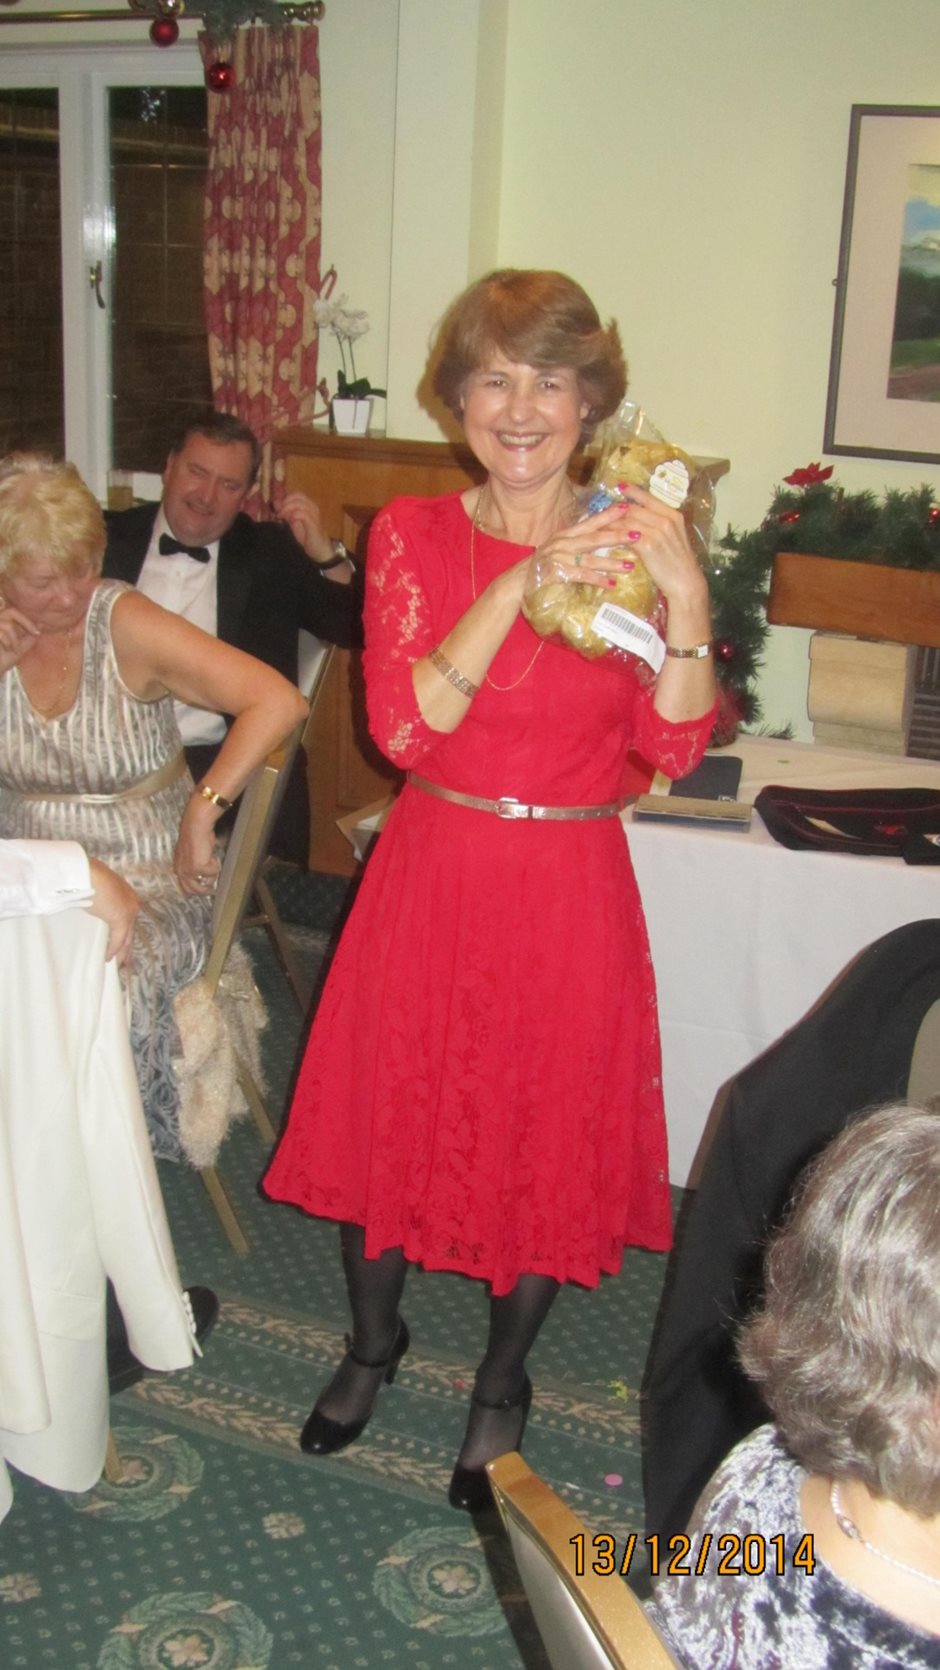 Photo 29 from the R29 2014 Christmas Dinner gallery